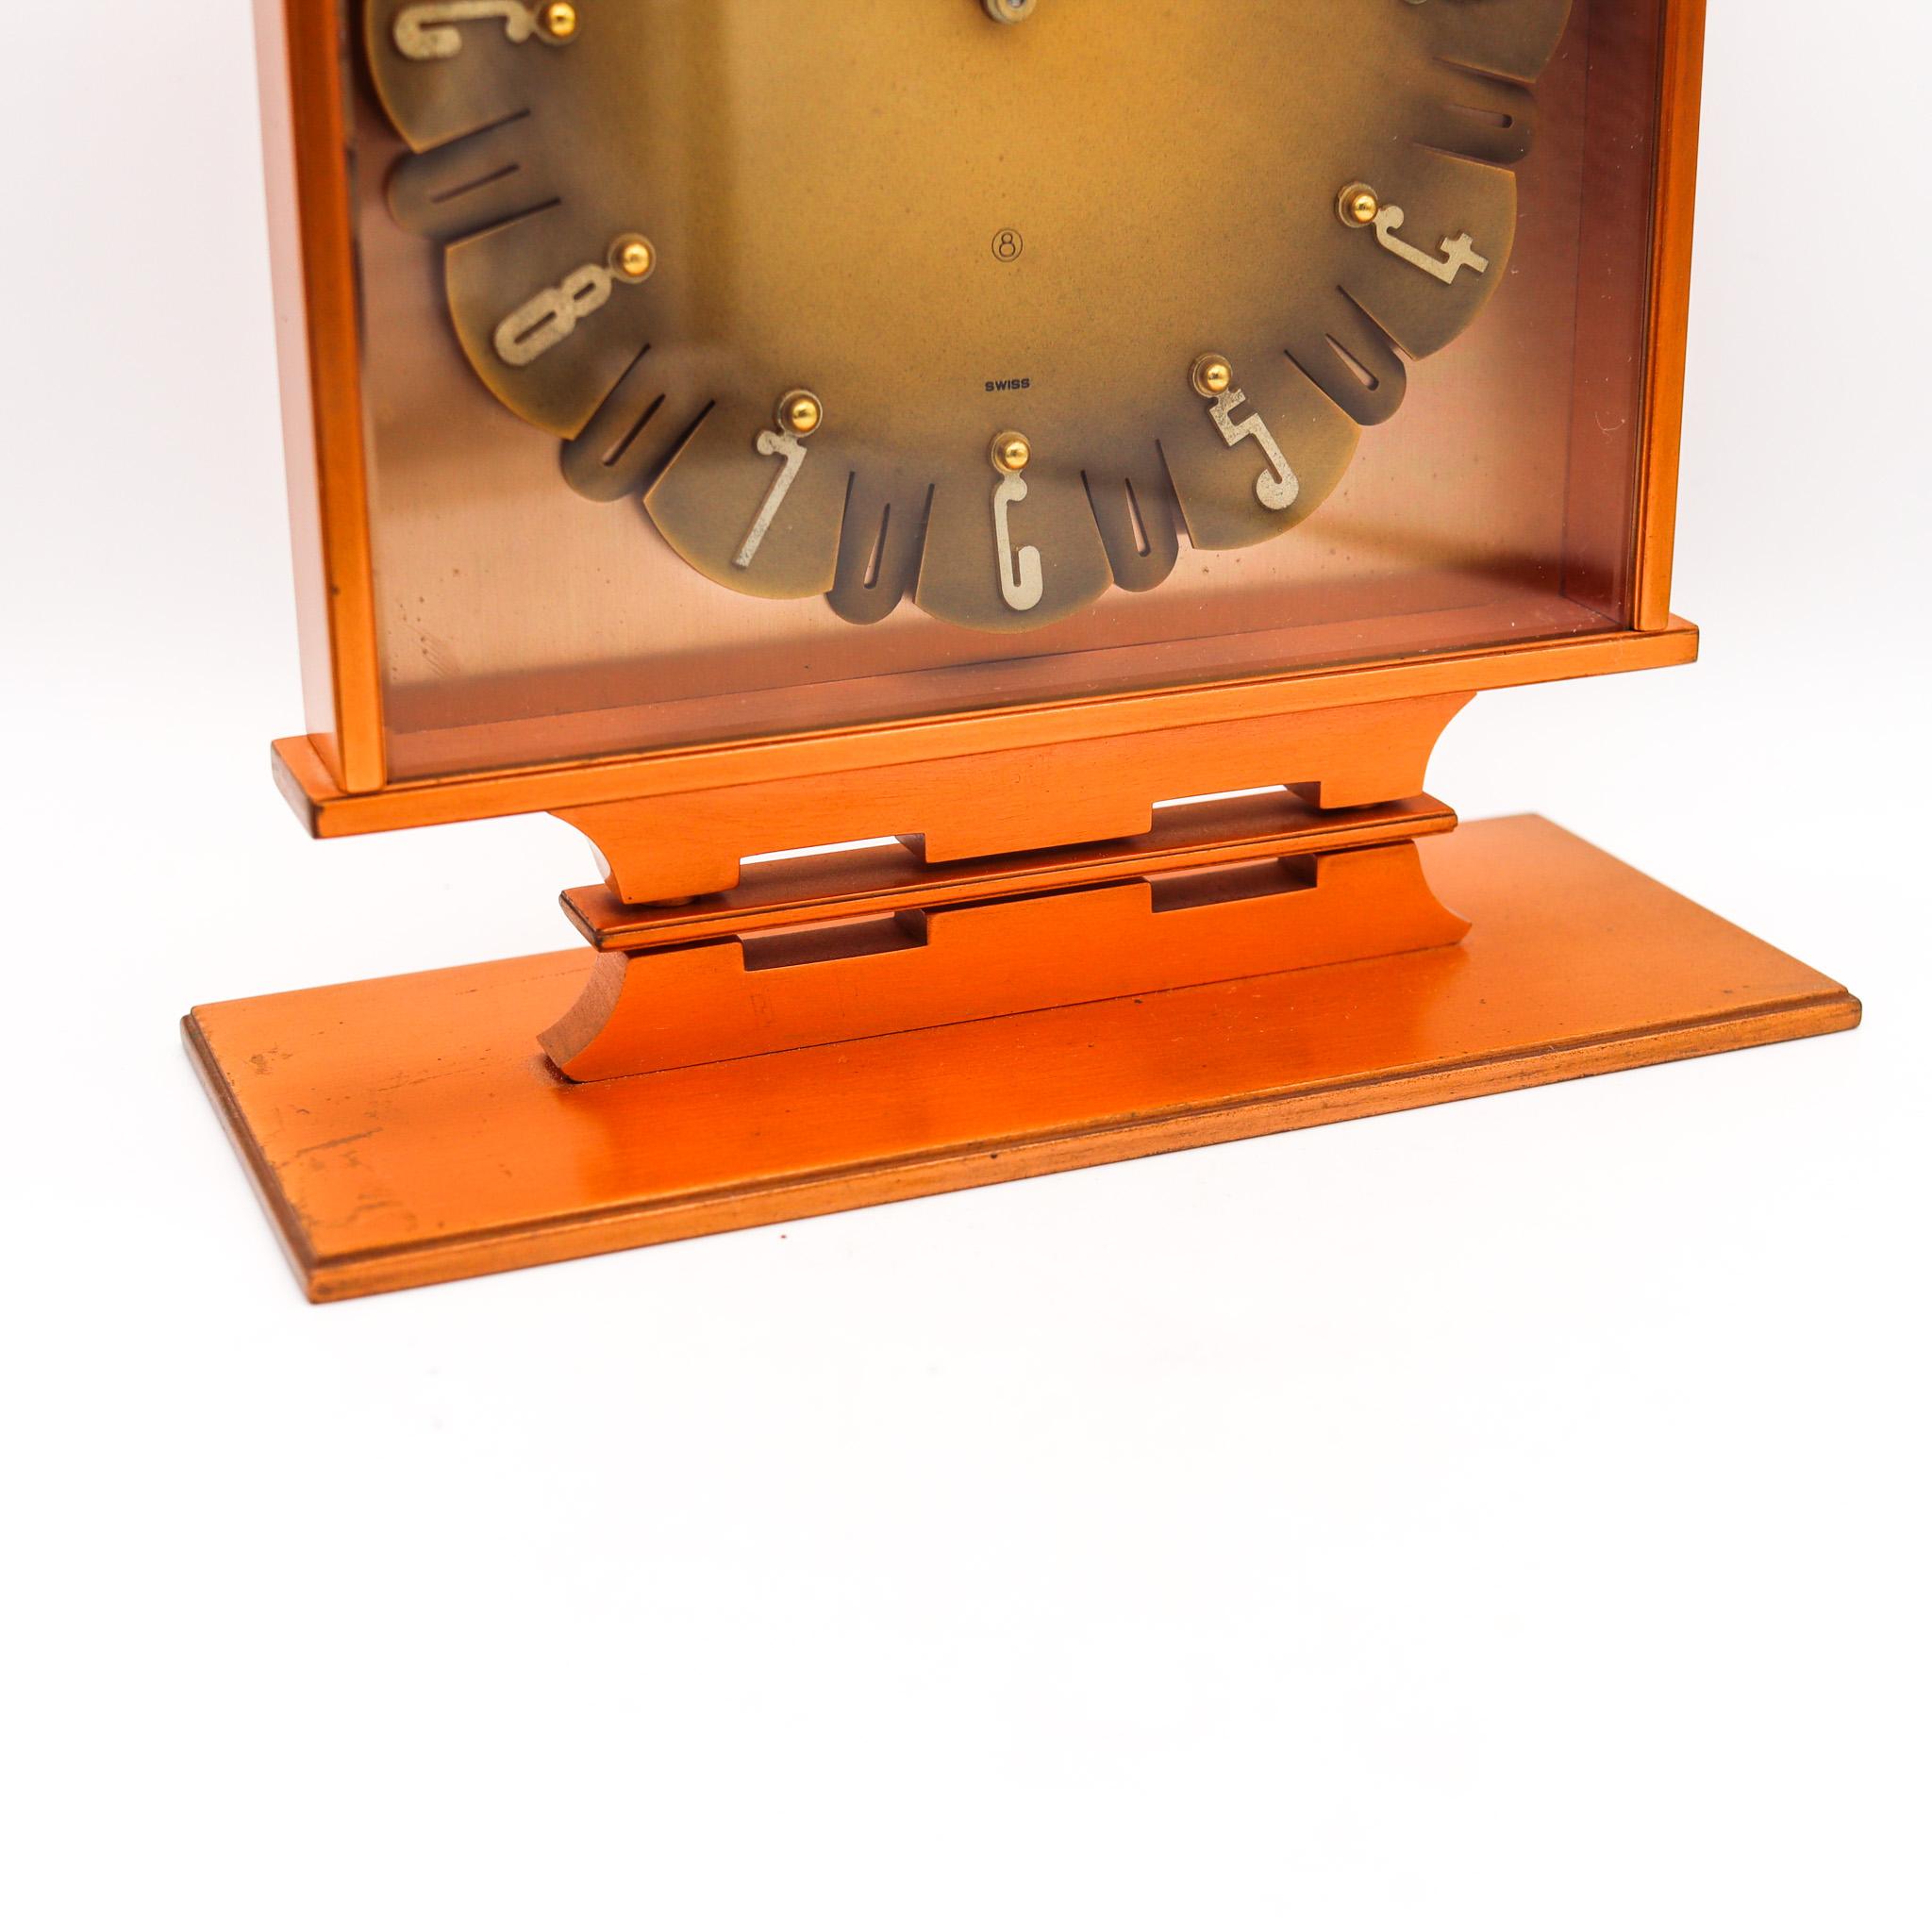 Desk clock designed by Jaeger LeCoultre.

Fabulous geometric desk-table clock, created in Switzerland by the clockmakers of Jaeger LeCoultre, back in the 1950. This clock is very rare and has been crafted with retro modernist patterns in solid